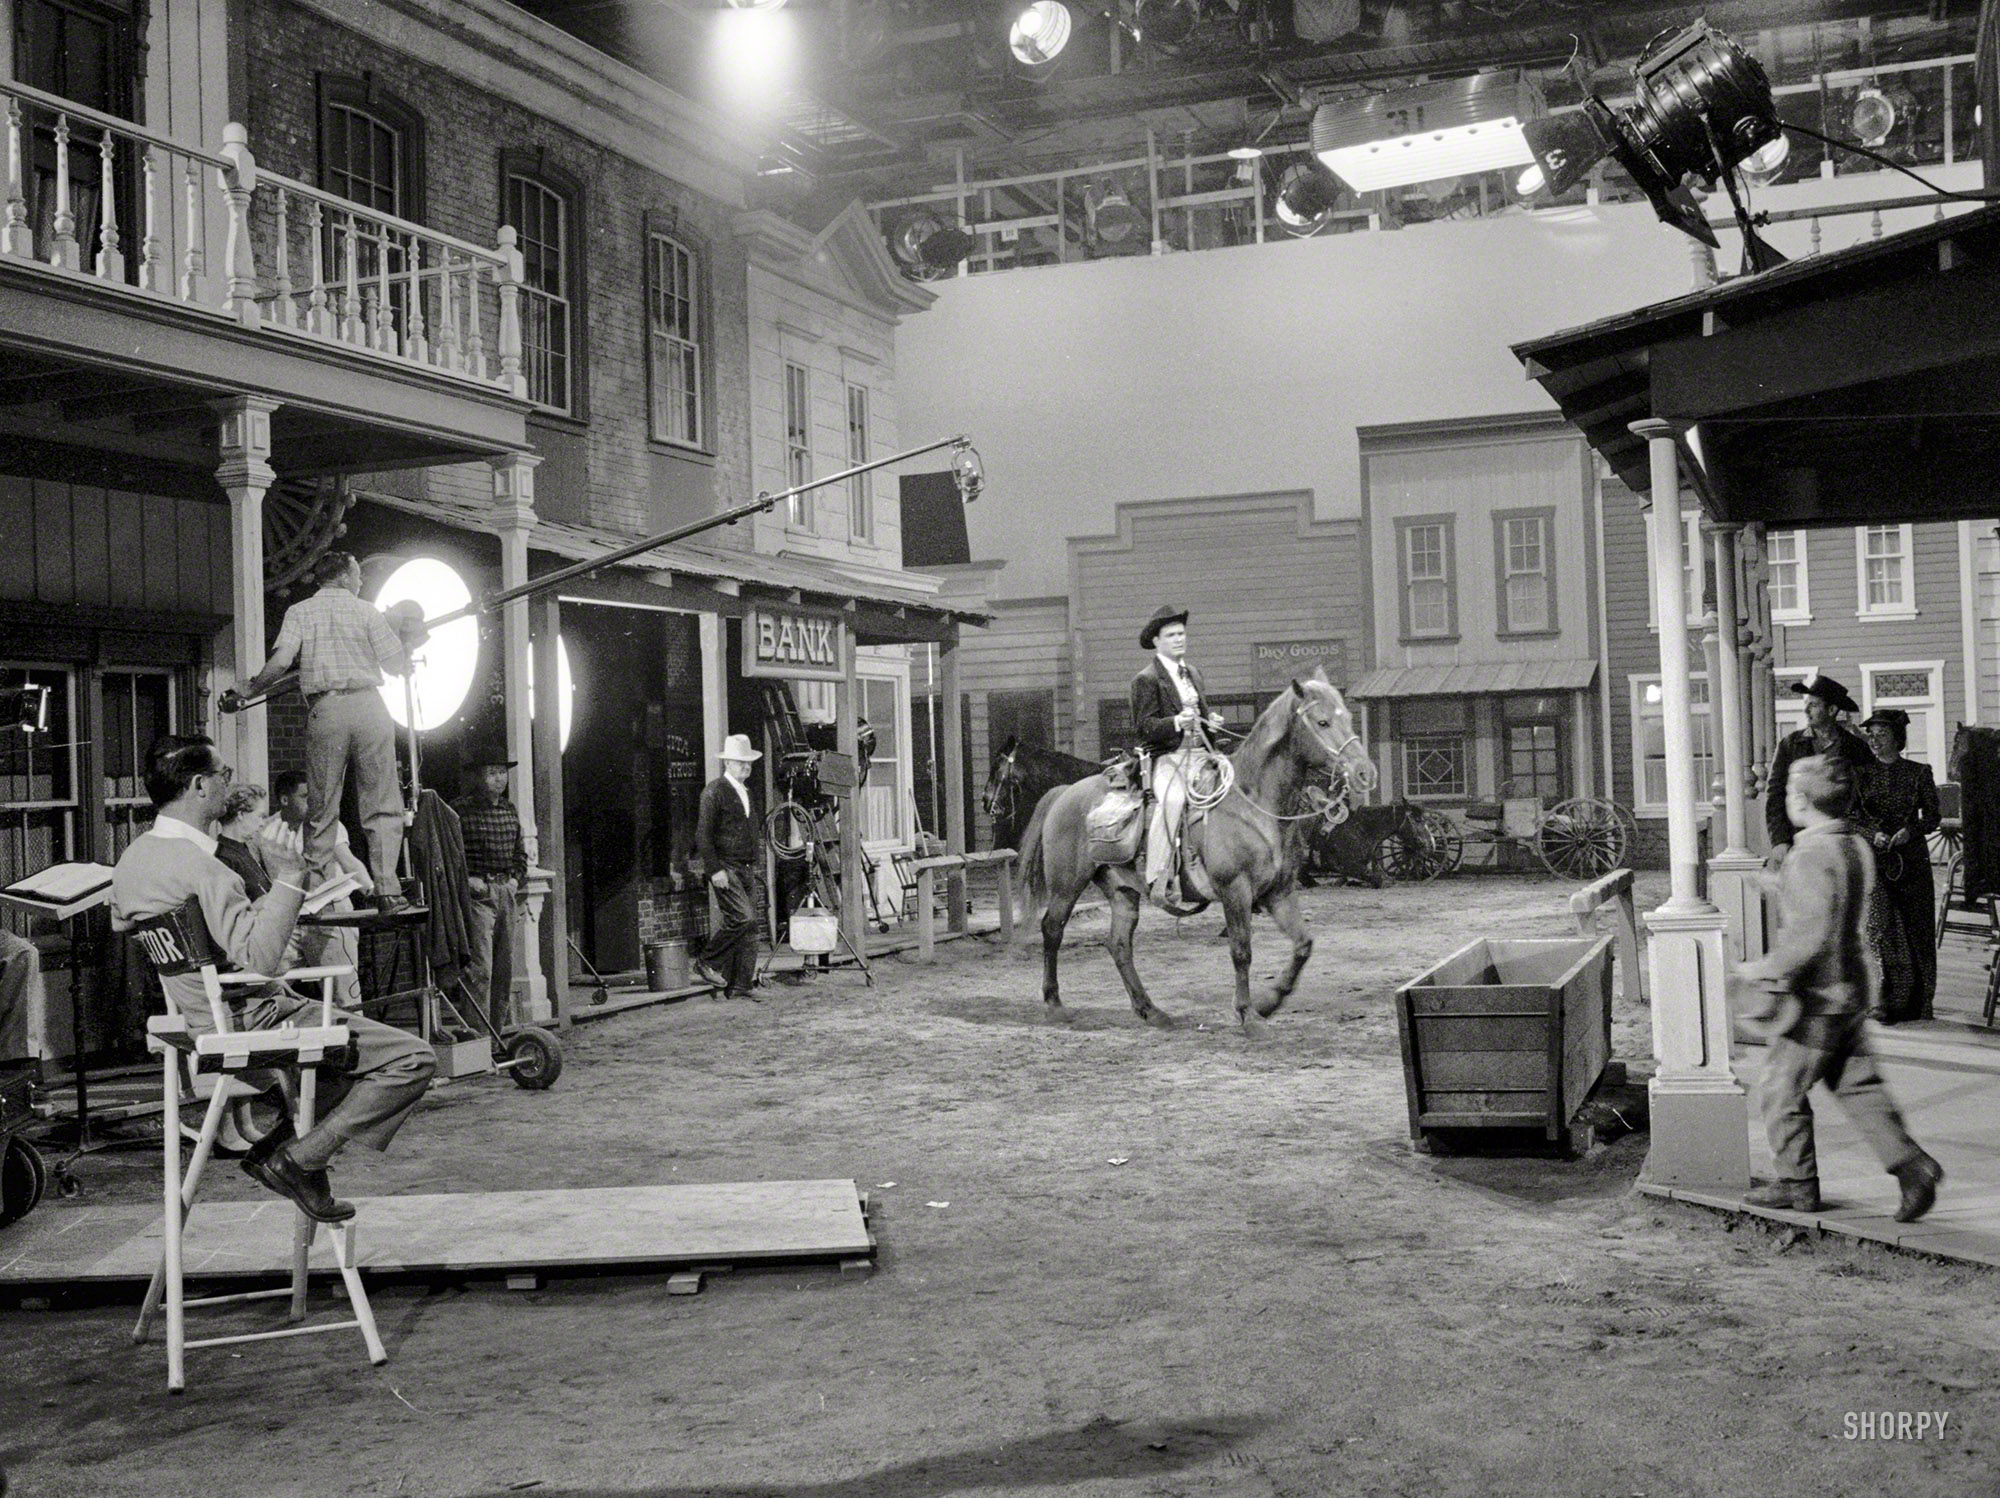 James Garner: 1928-2014
April 1958. "James Garner on the set of the television show Maverick." Photo by Maurice Terrell for Look magazine ("TV's Midas Touch"). View full size.